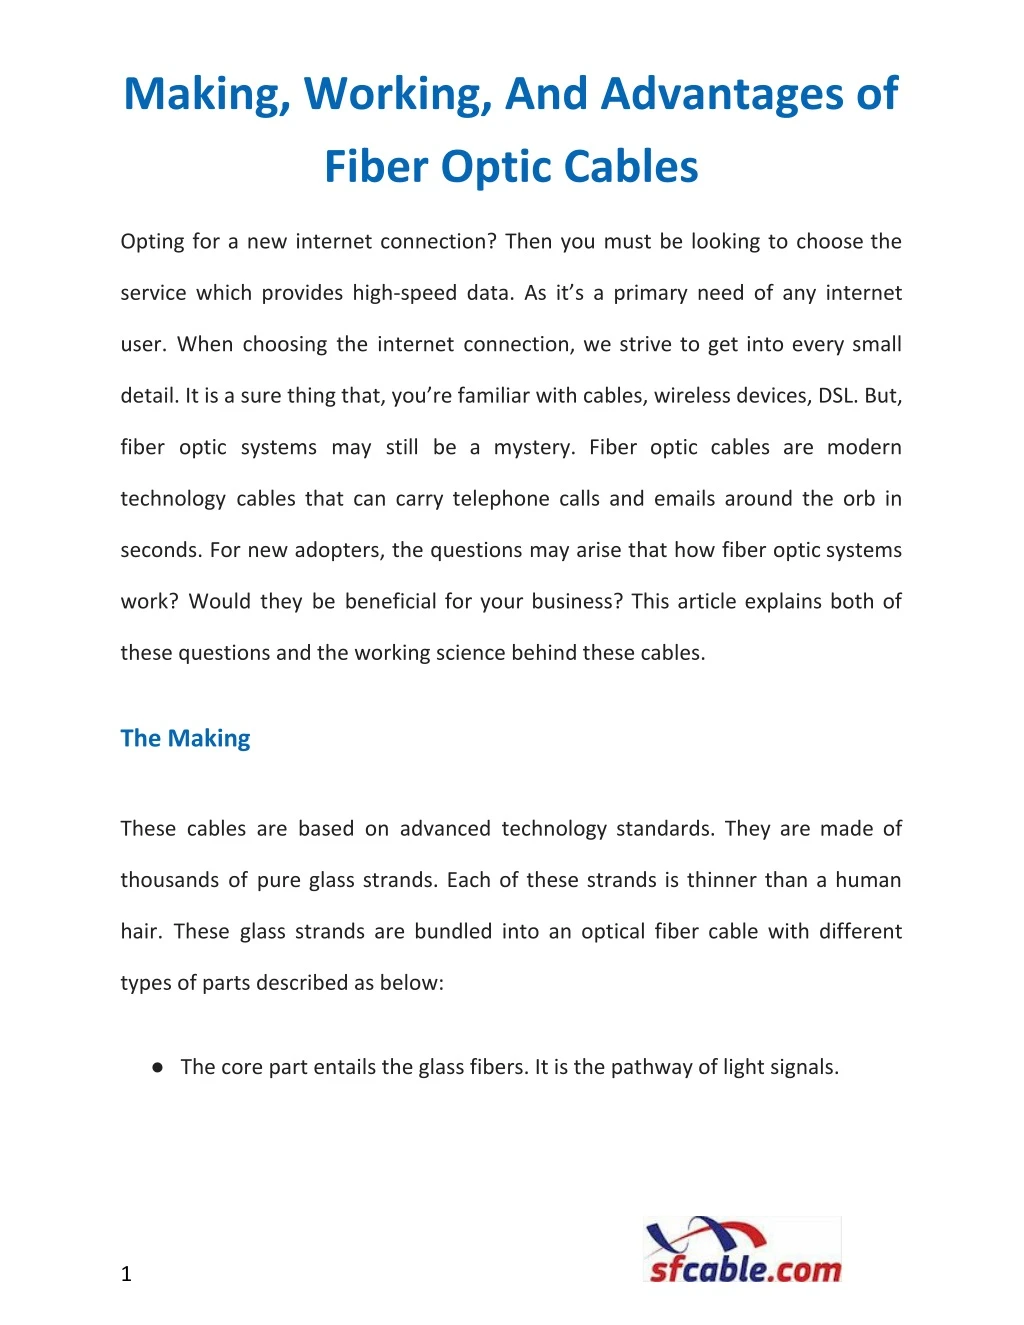 making working and advantages of fiber optic